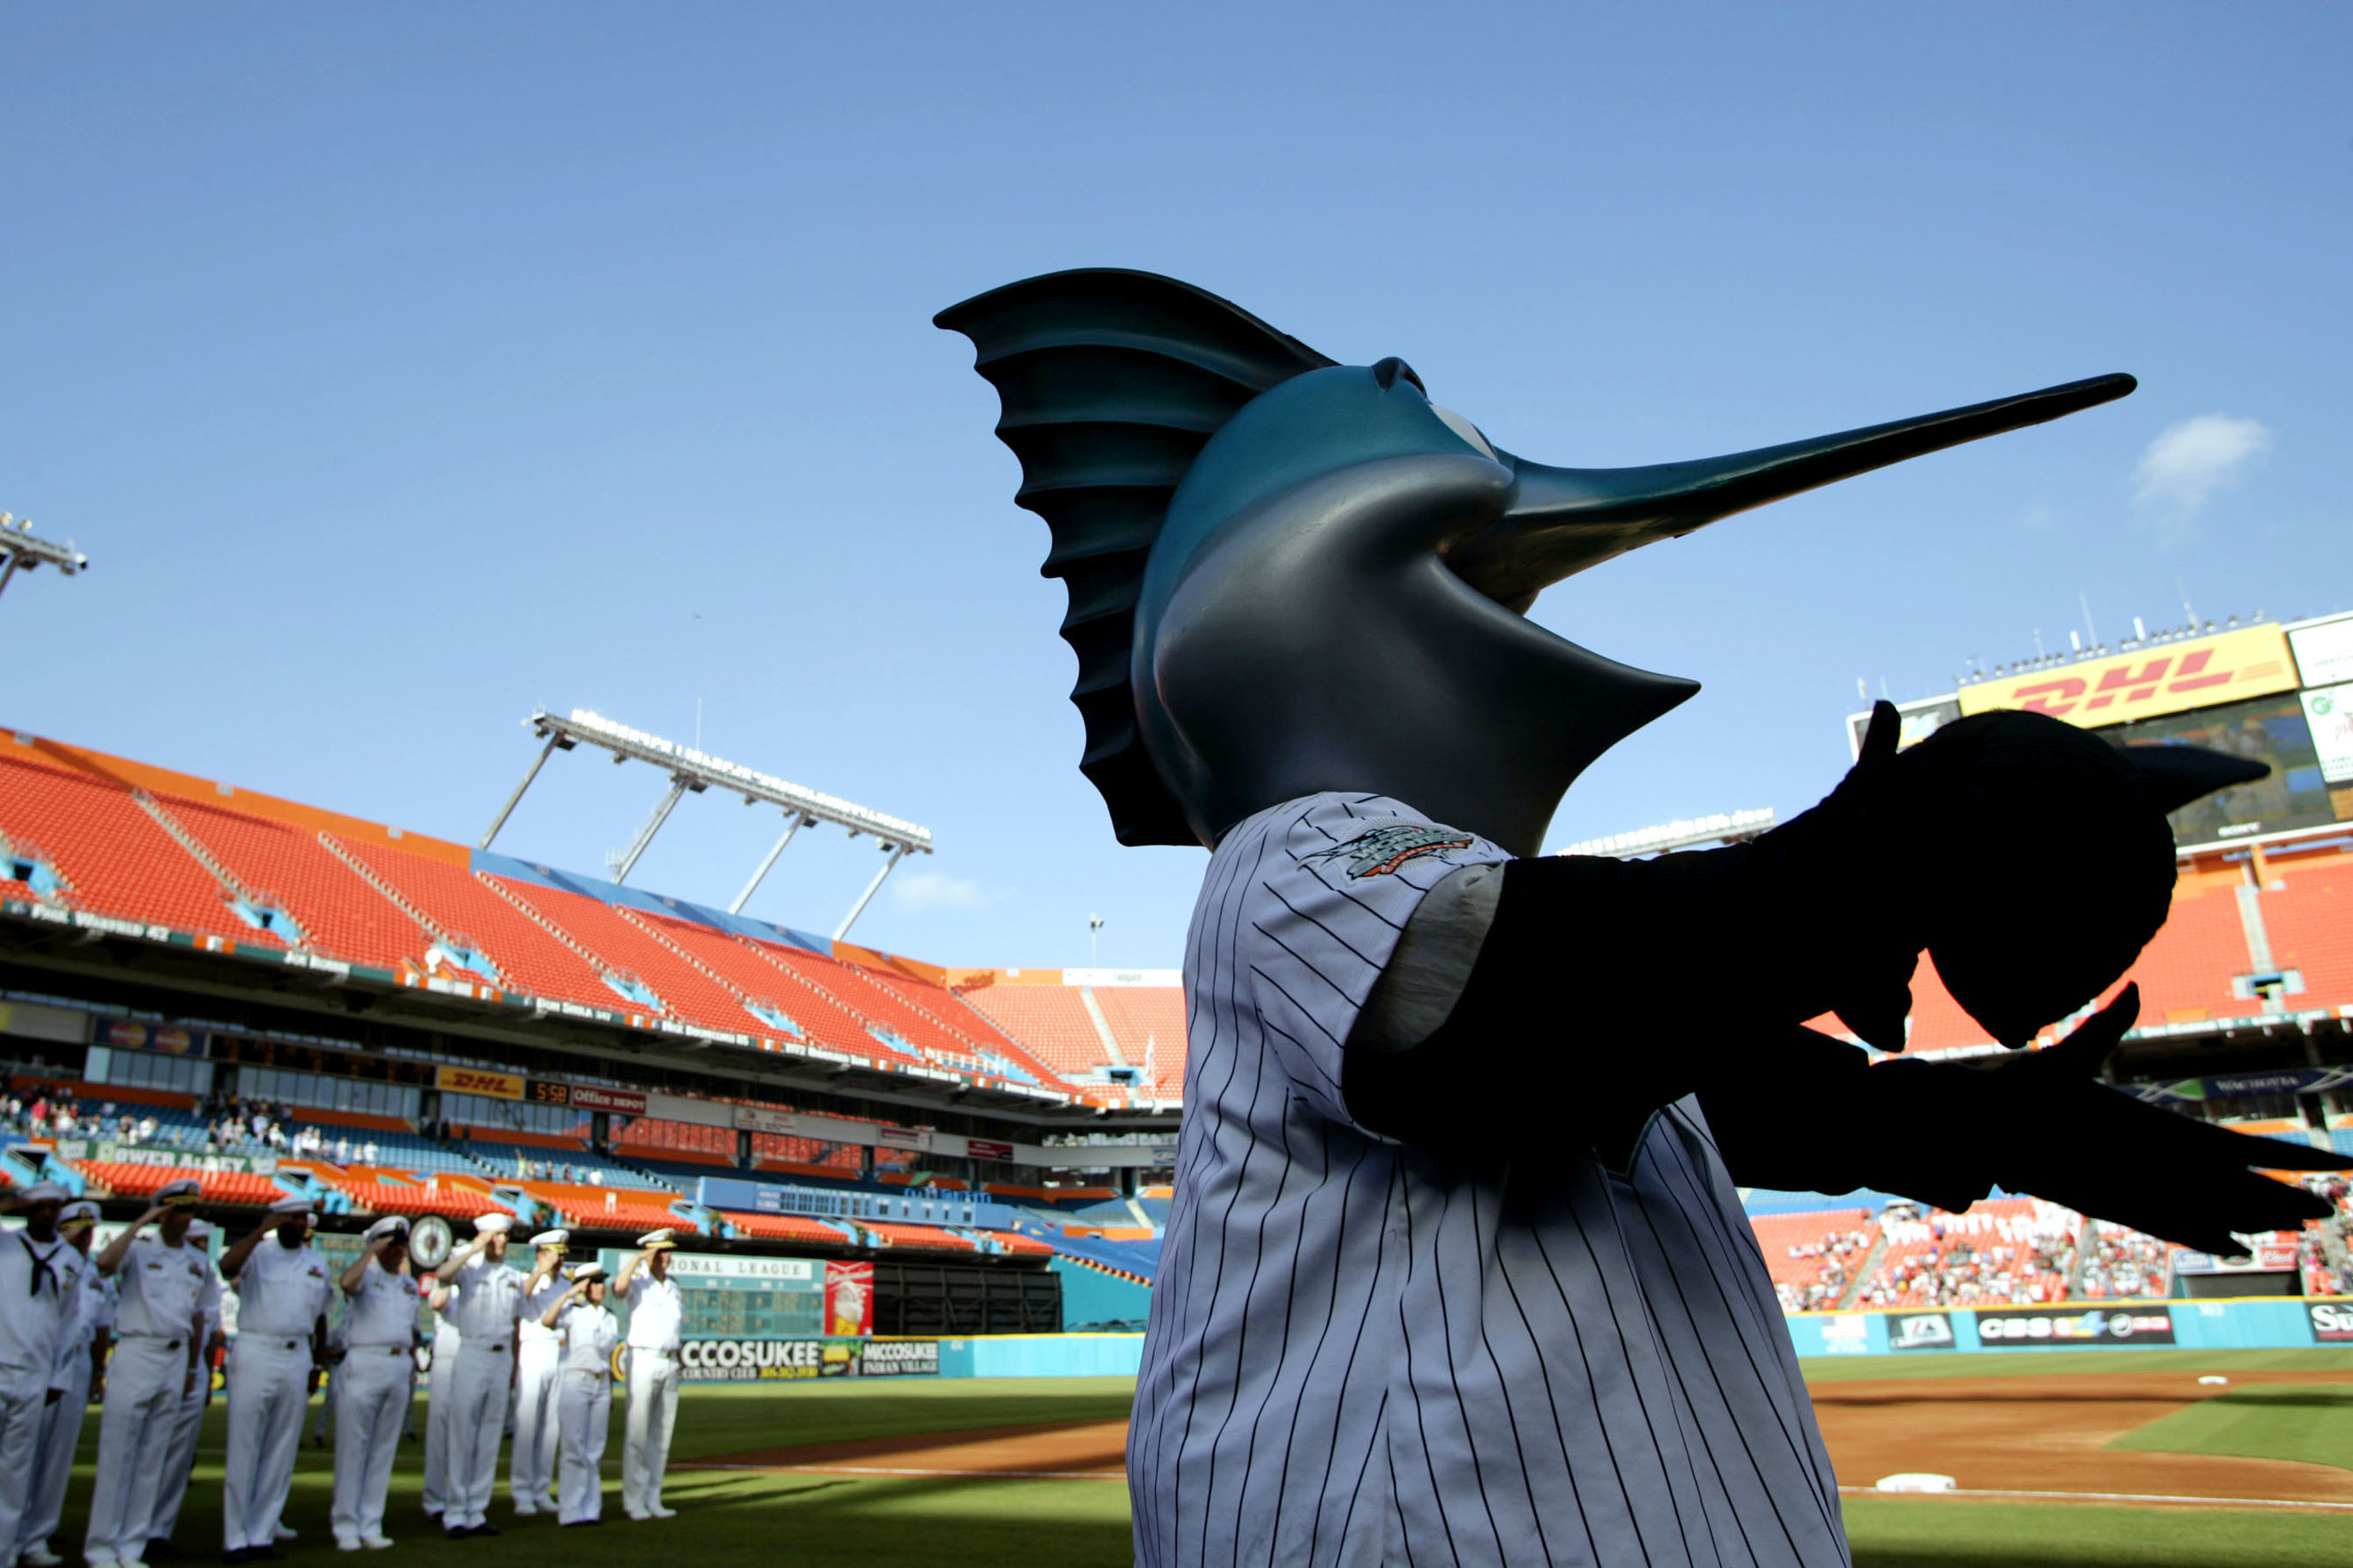 Miami Marlins on X: Flashback to the past. ✨ The Marlins will be